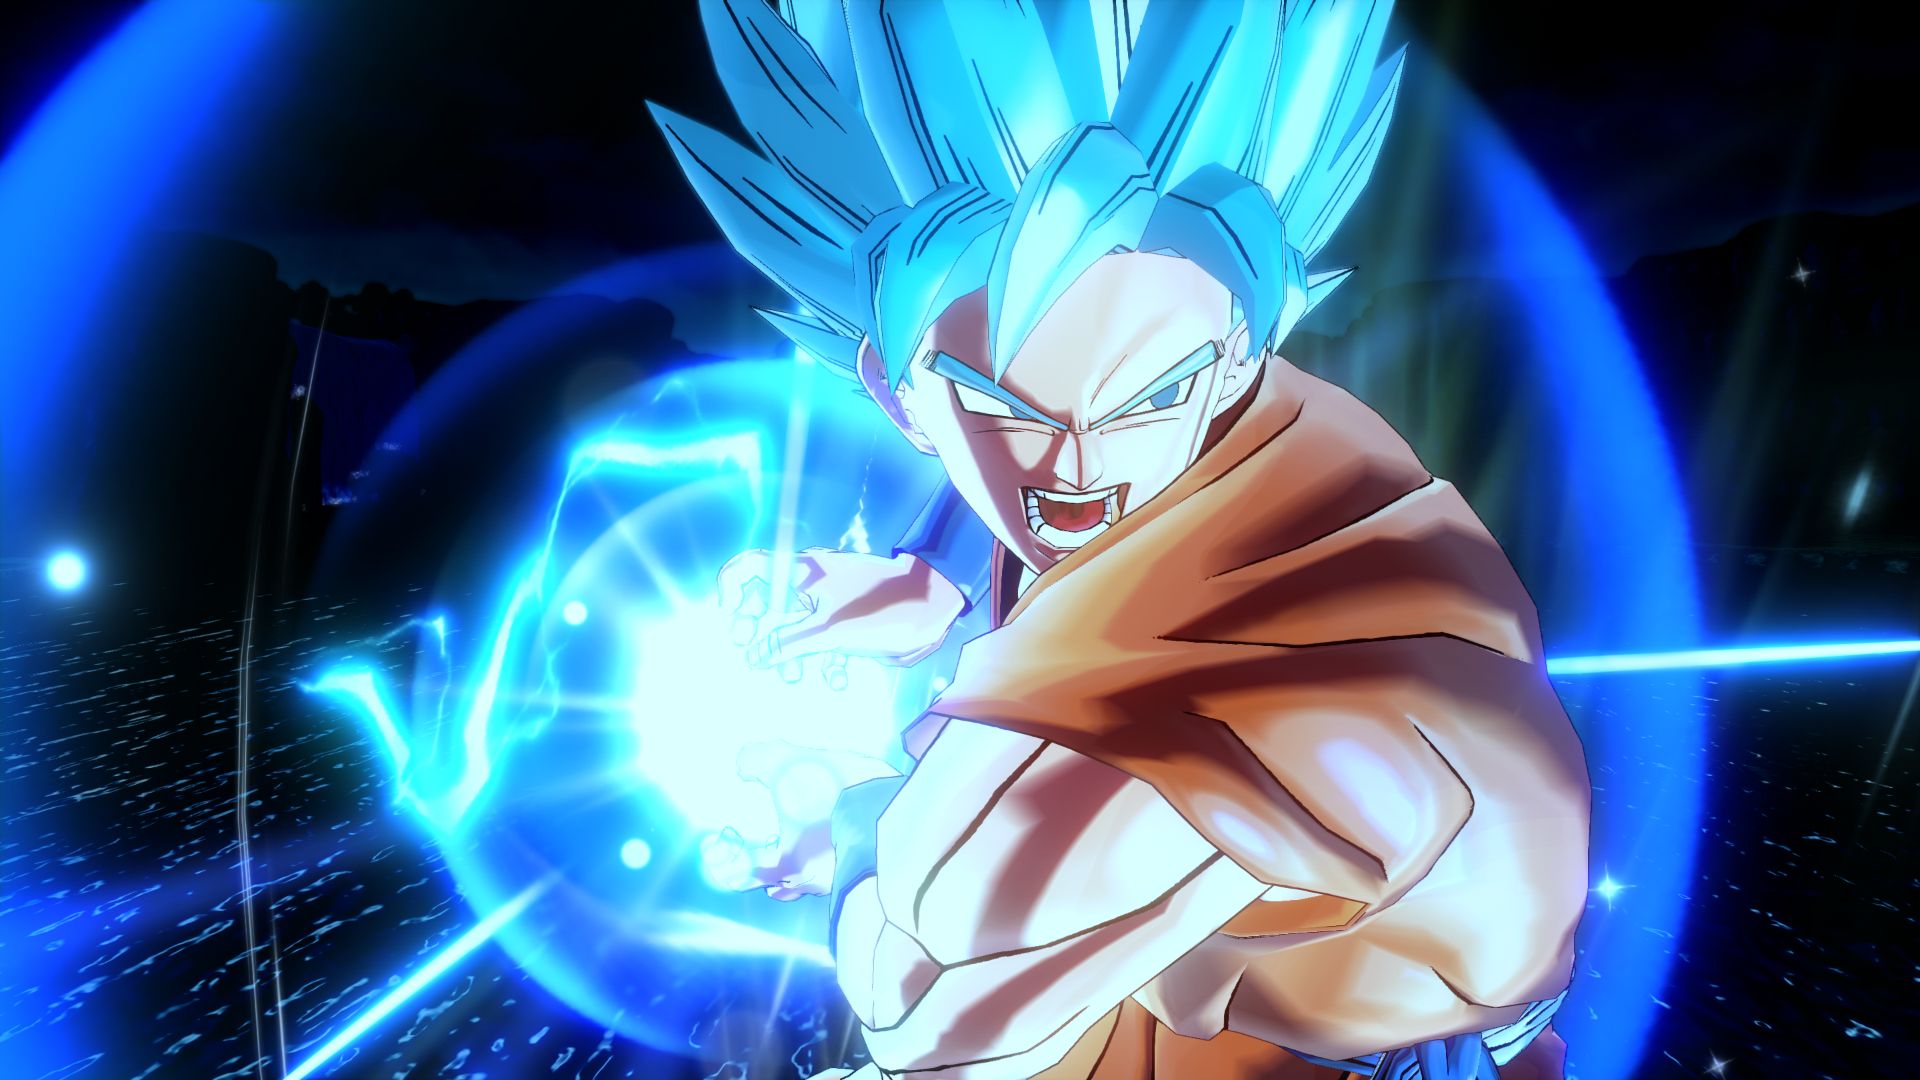 Dragon Ball Xenoverse Gave Us The Fan-Fiction We Always Wanted